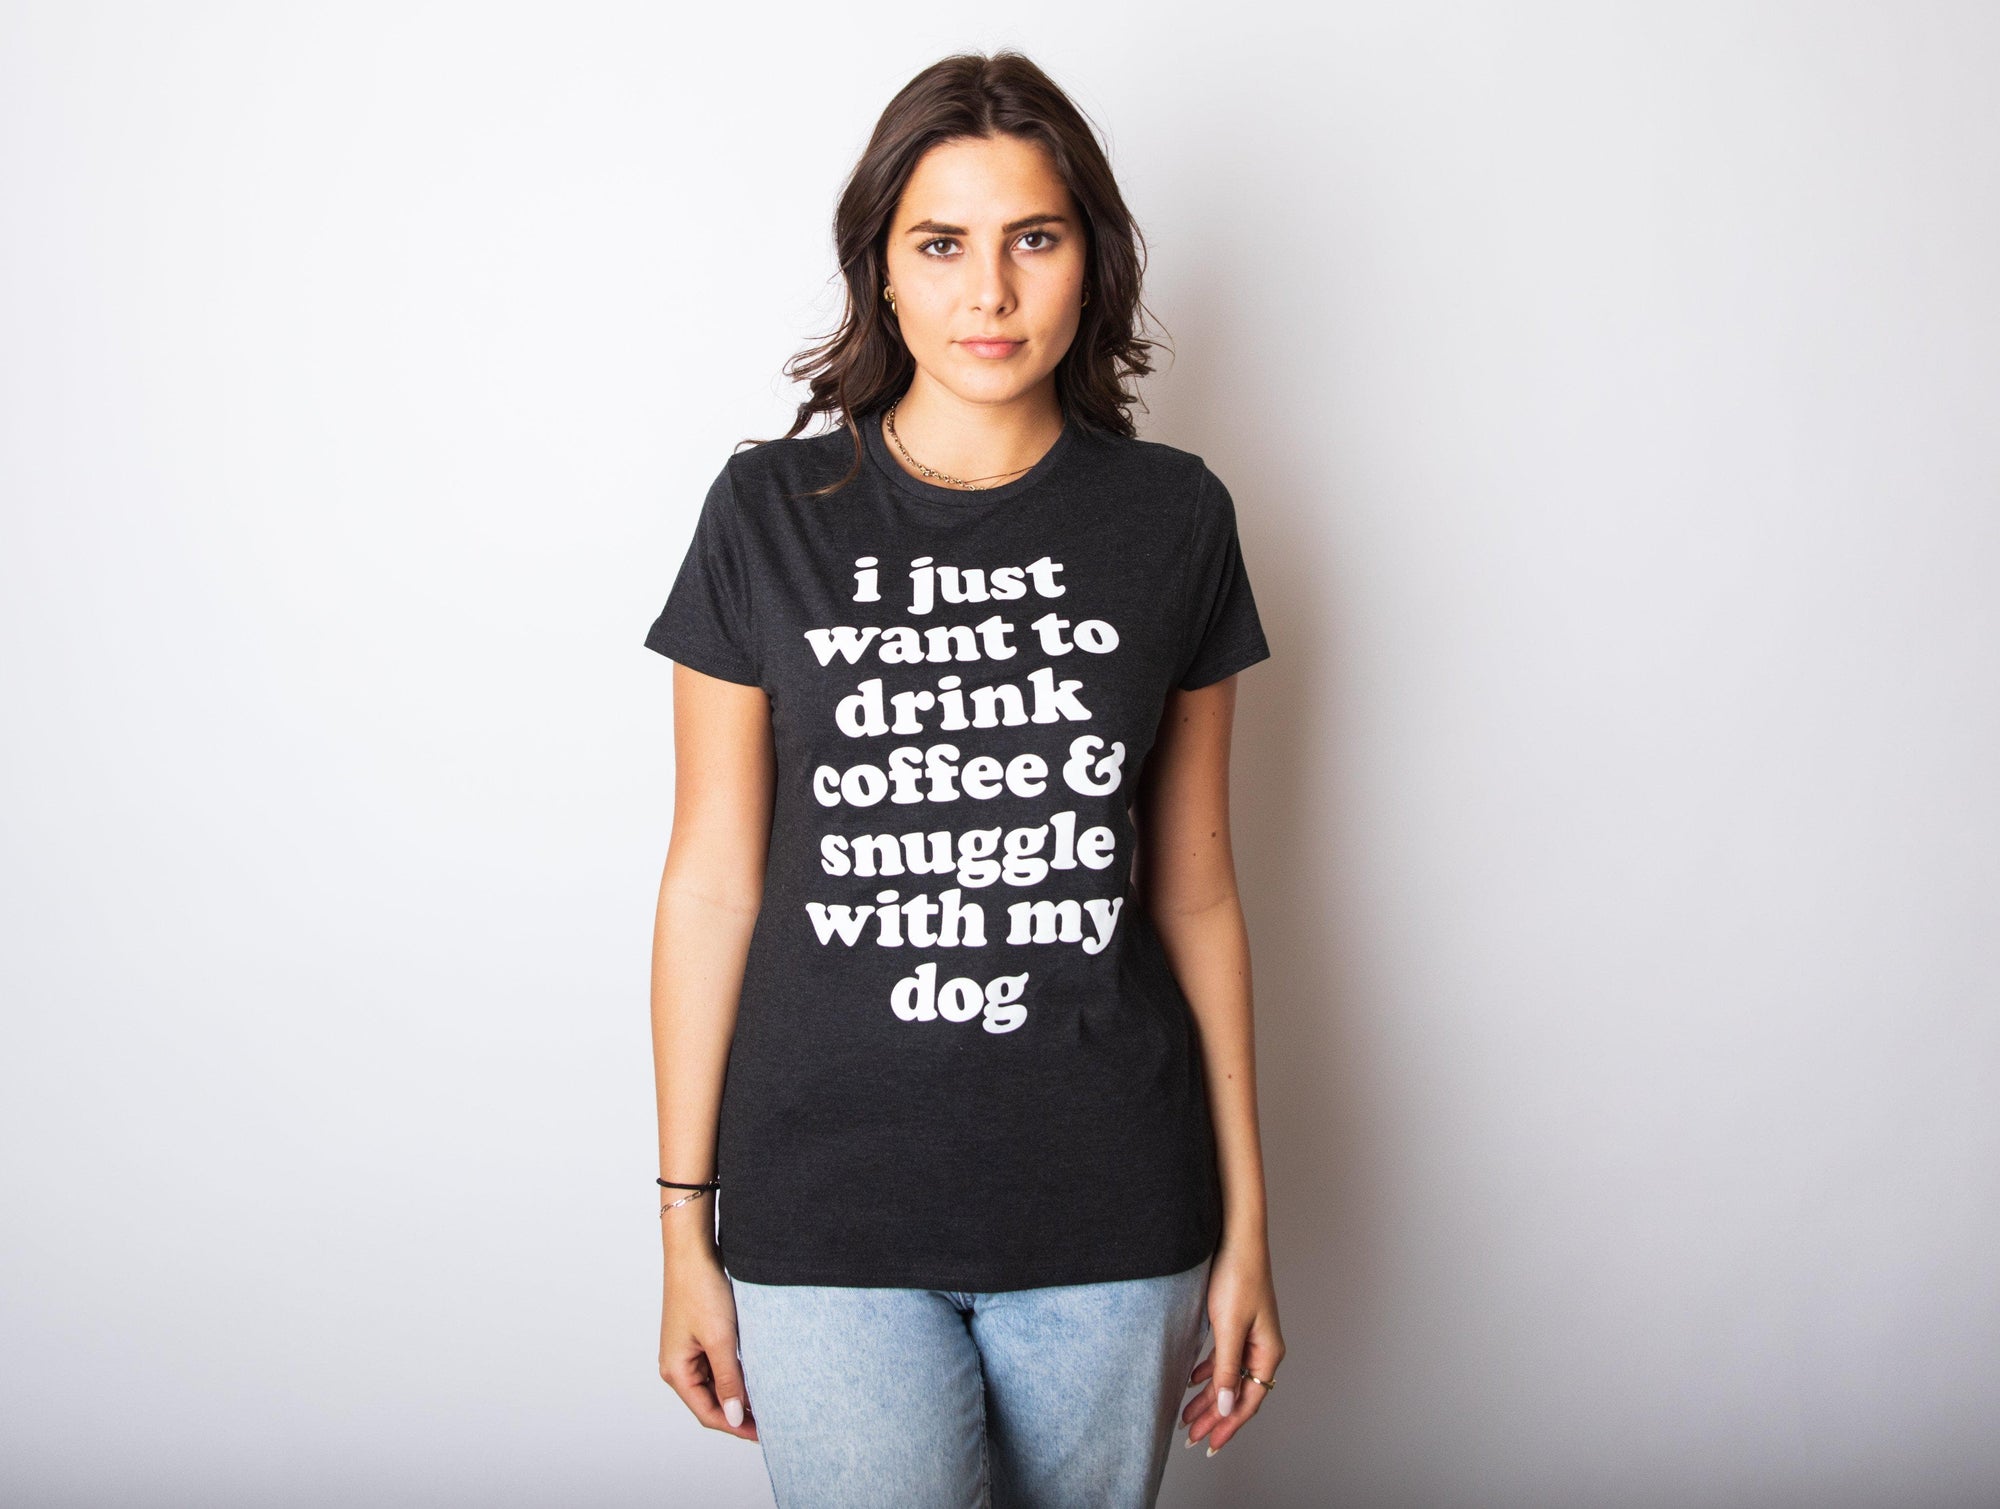 I Just Want To Drink Coffee and Snuggle With My Dog Women's Tshirt  -  Crazy Dog T-Shirts